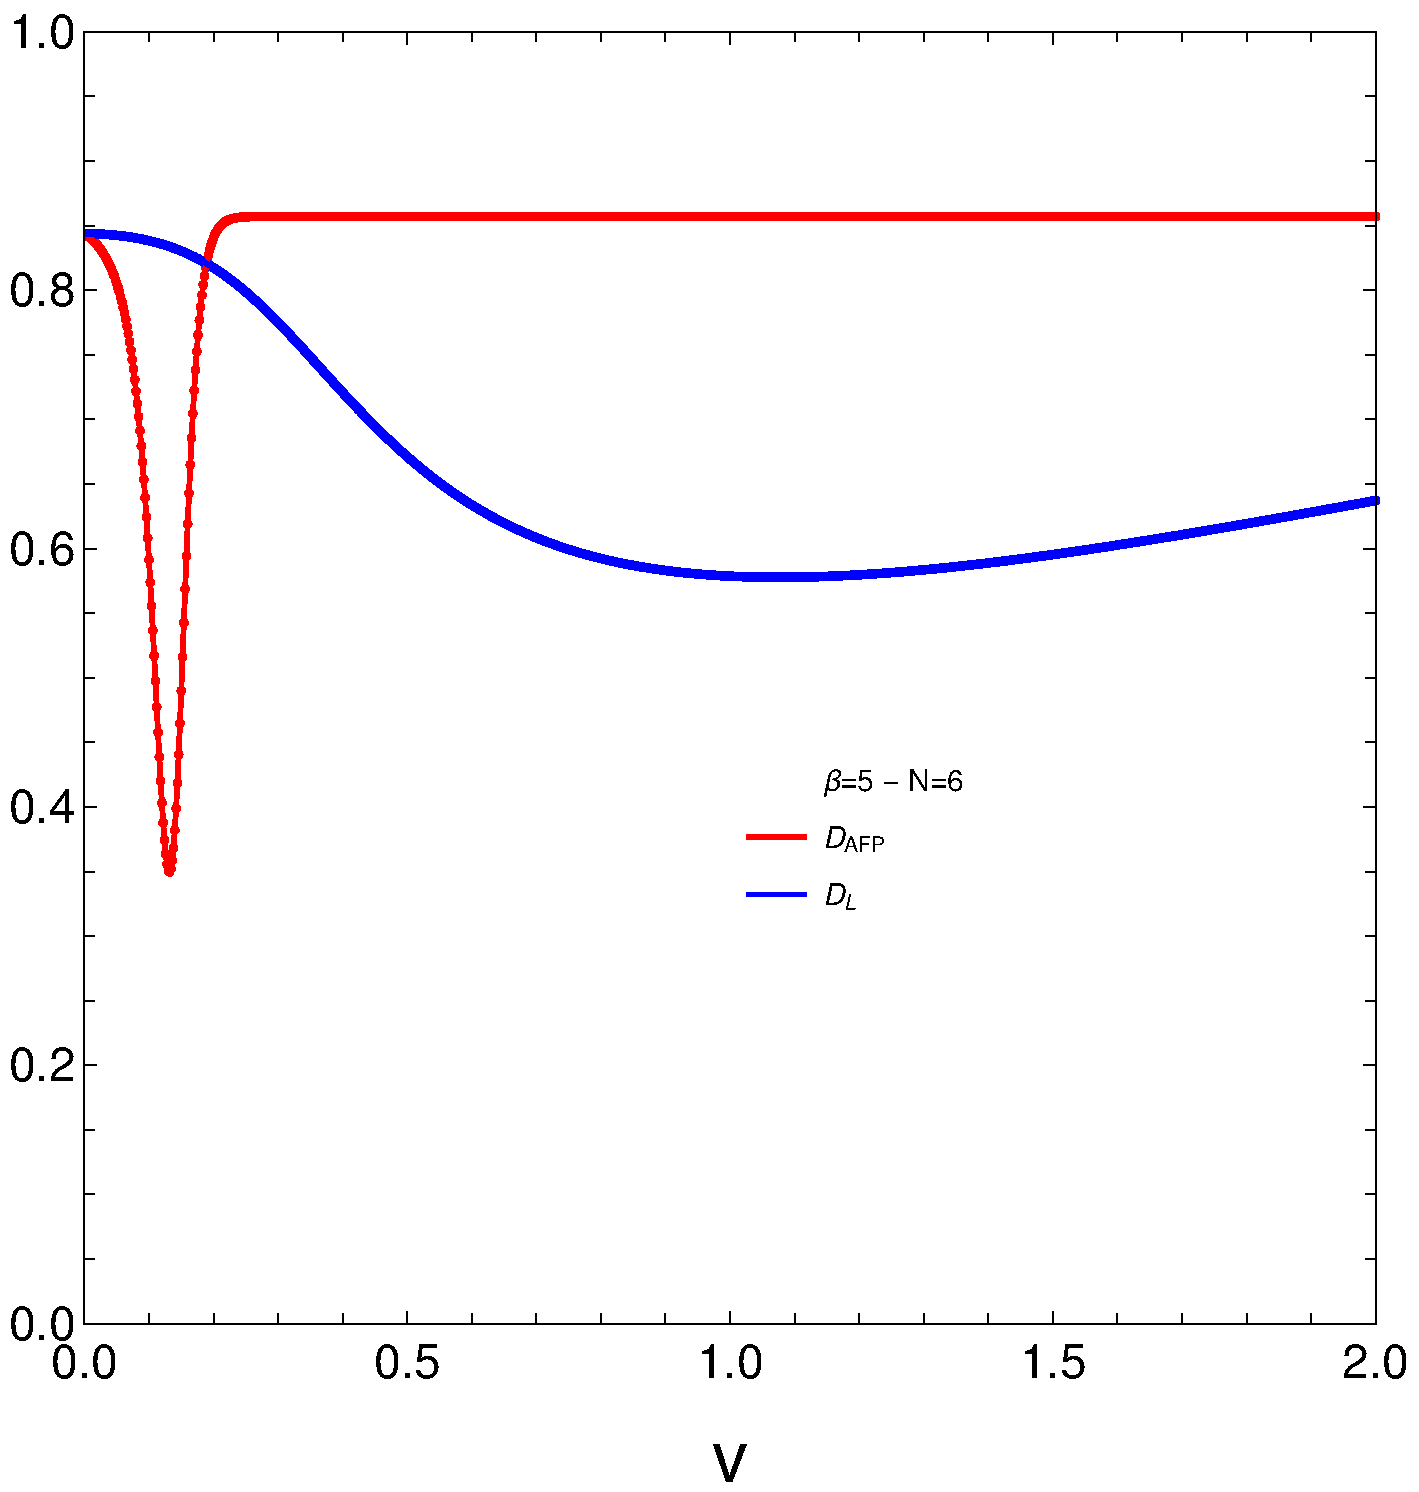 Vertical axis: DAFP (red) and Lipkin’s DL (blue) versus v (horizontal axis). The remaining details are as in Figure 1.